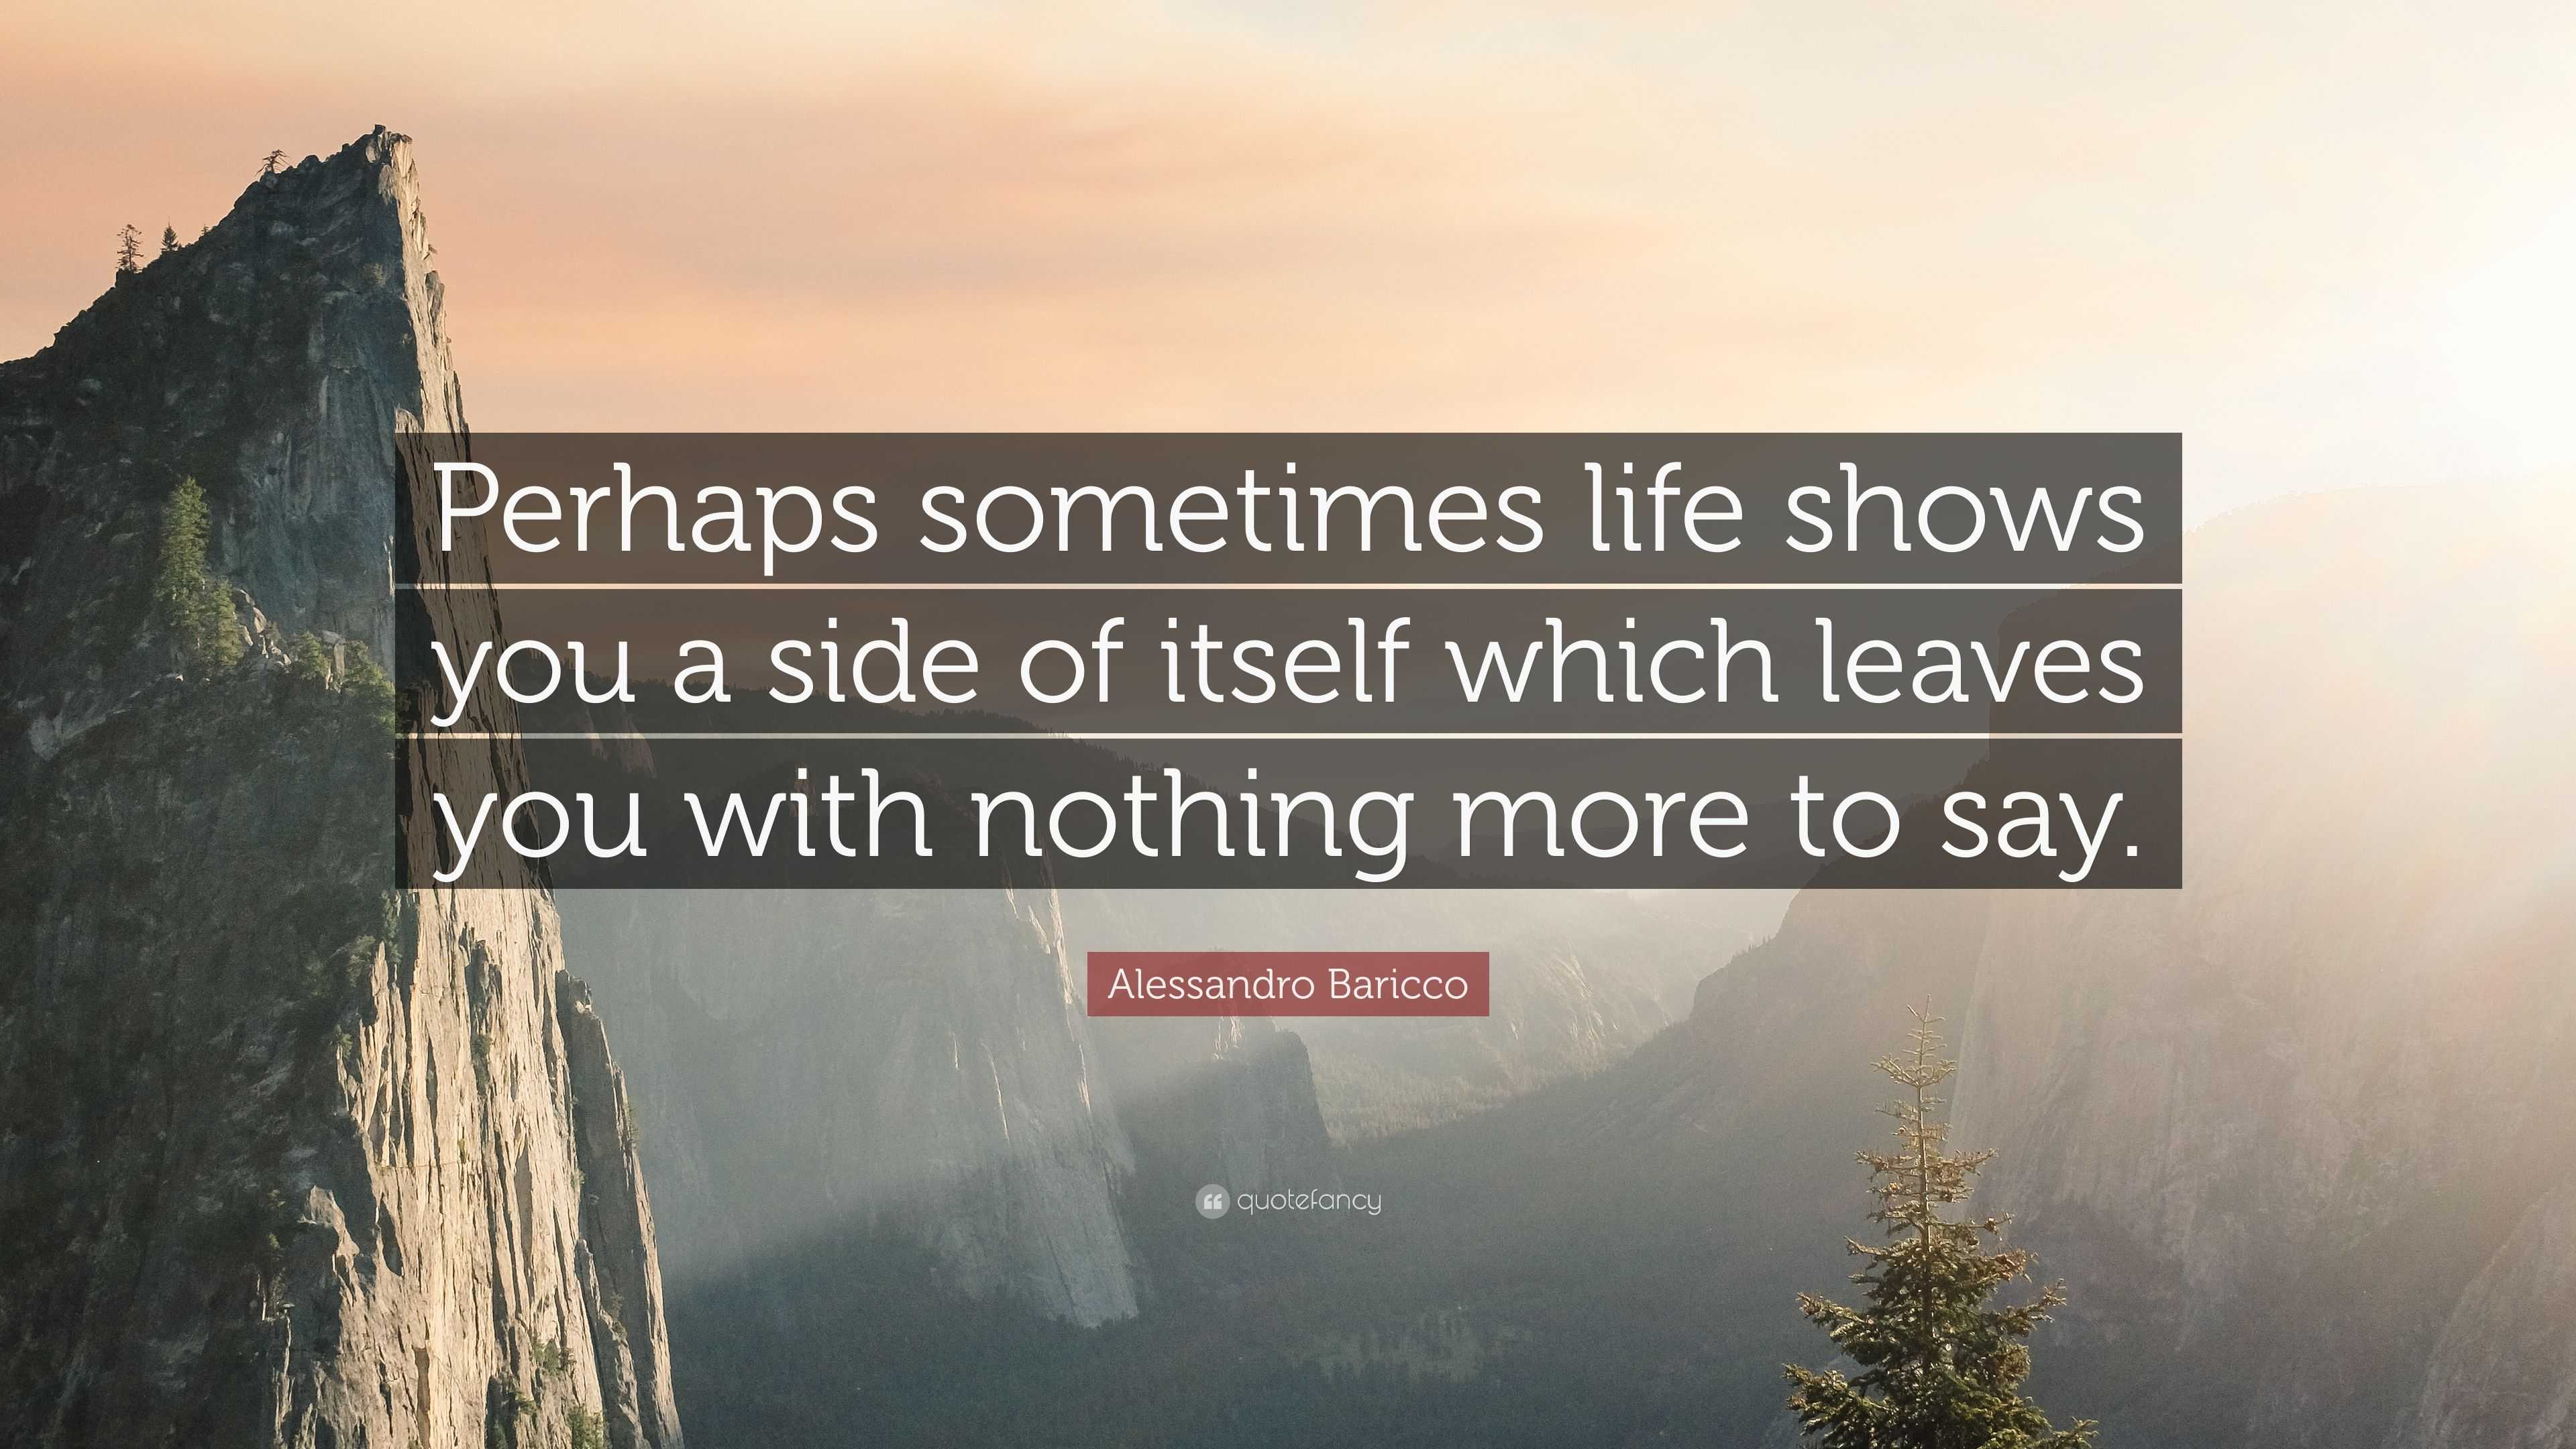 Alessandro Baricco Quote: “Perhaps sometimes life shows you a side of  itself which leaves you with